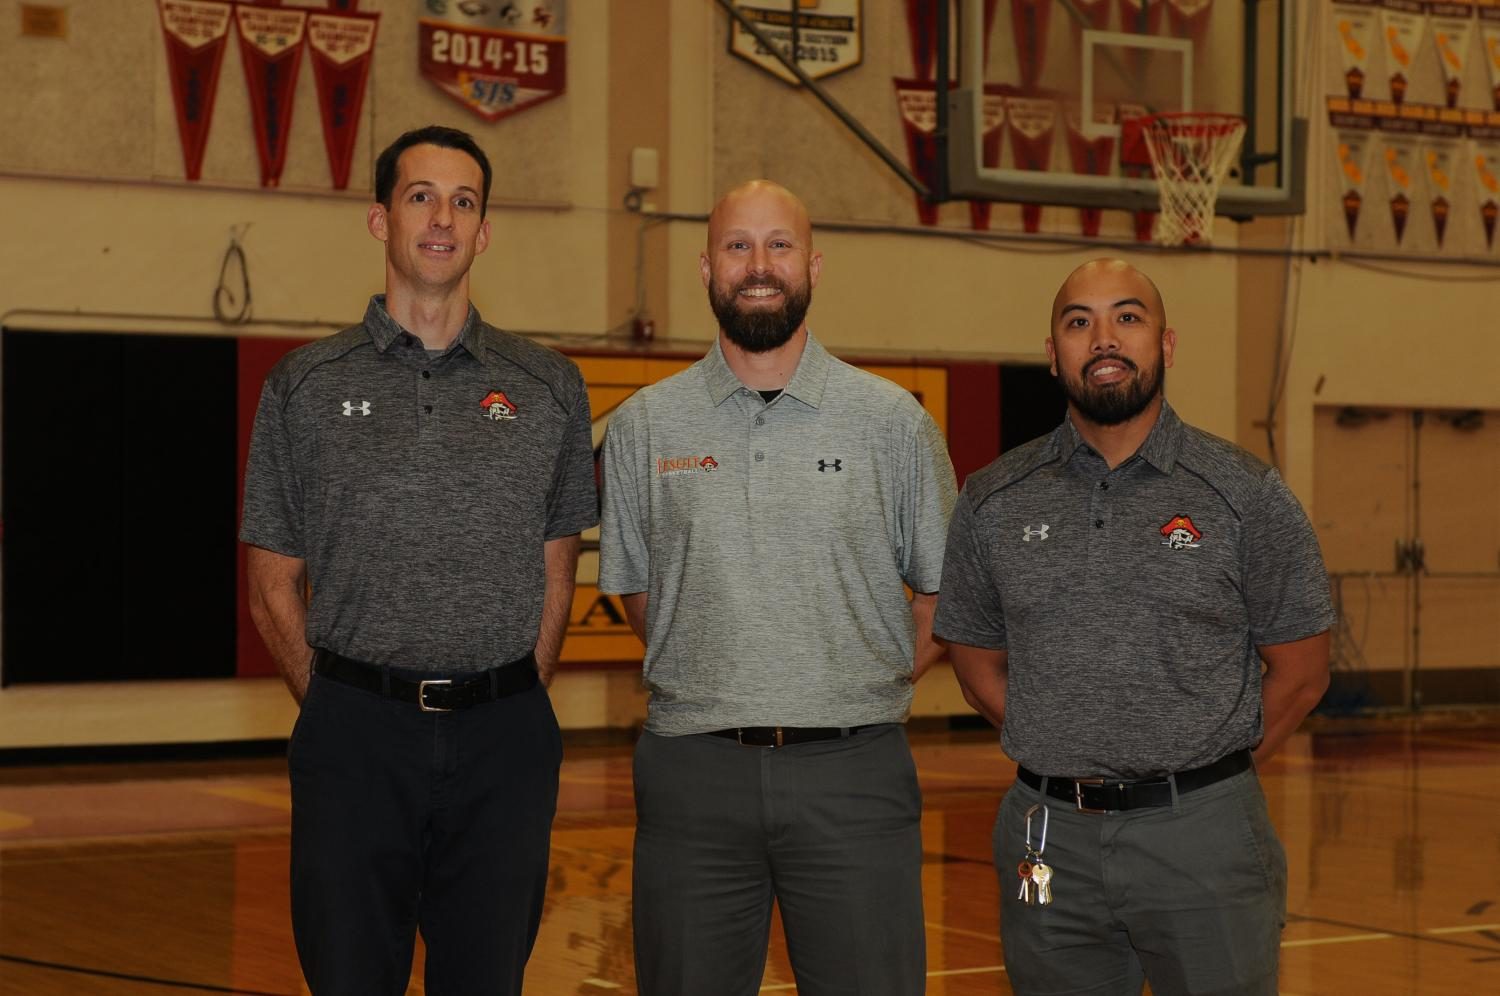 Coach Rotz 92 (middle) poses with his assistant varsity coaches. | Jesuit Communications